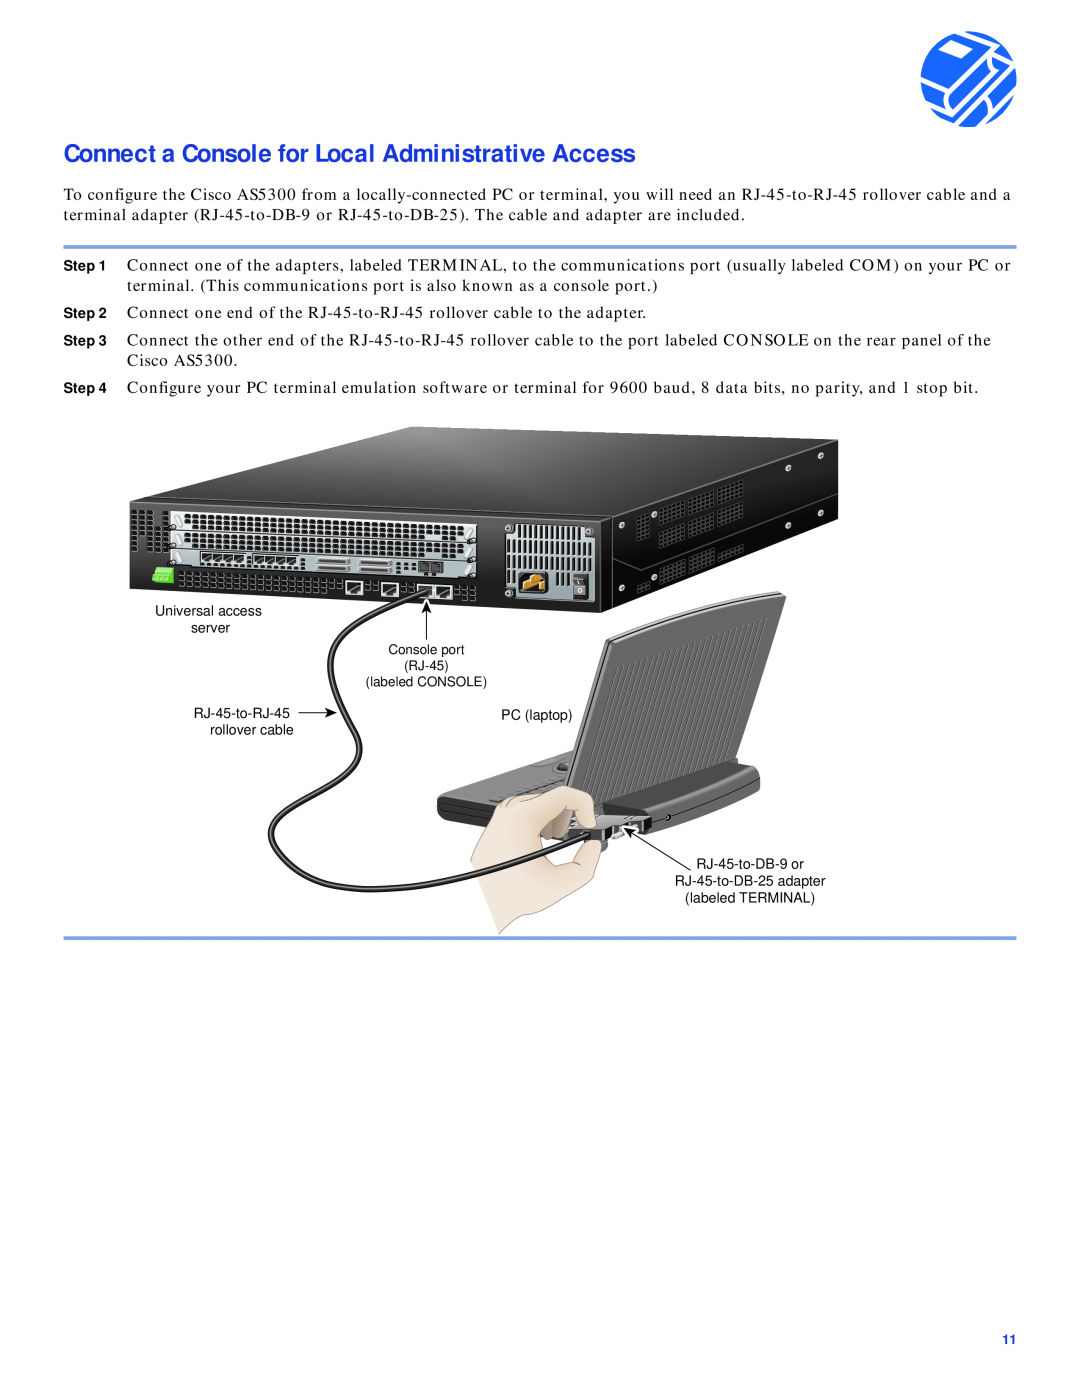 Cisco Systems AS5300 Connect a Console for Local Administrative Access, Universal access server, RJ-45-to-RJ-45, PC laptop 